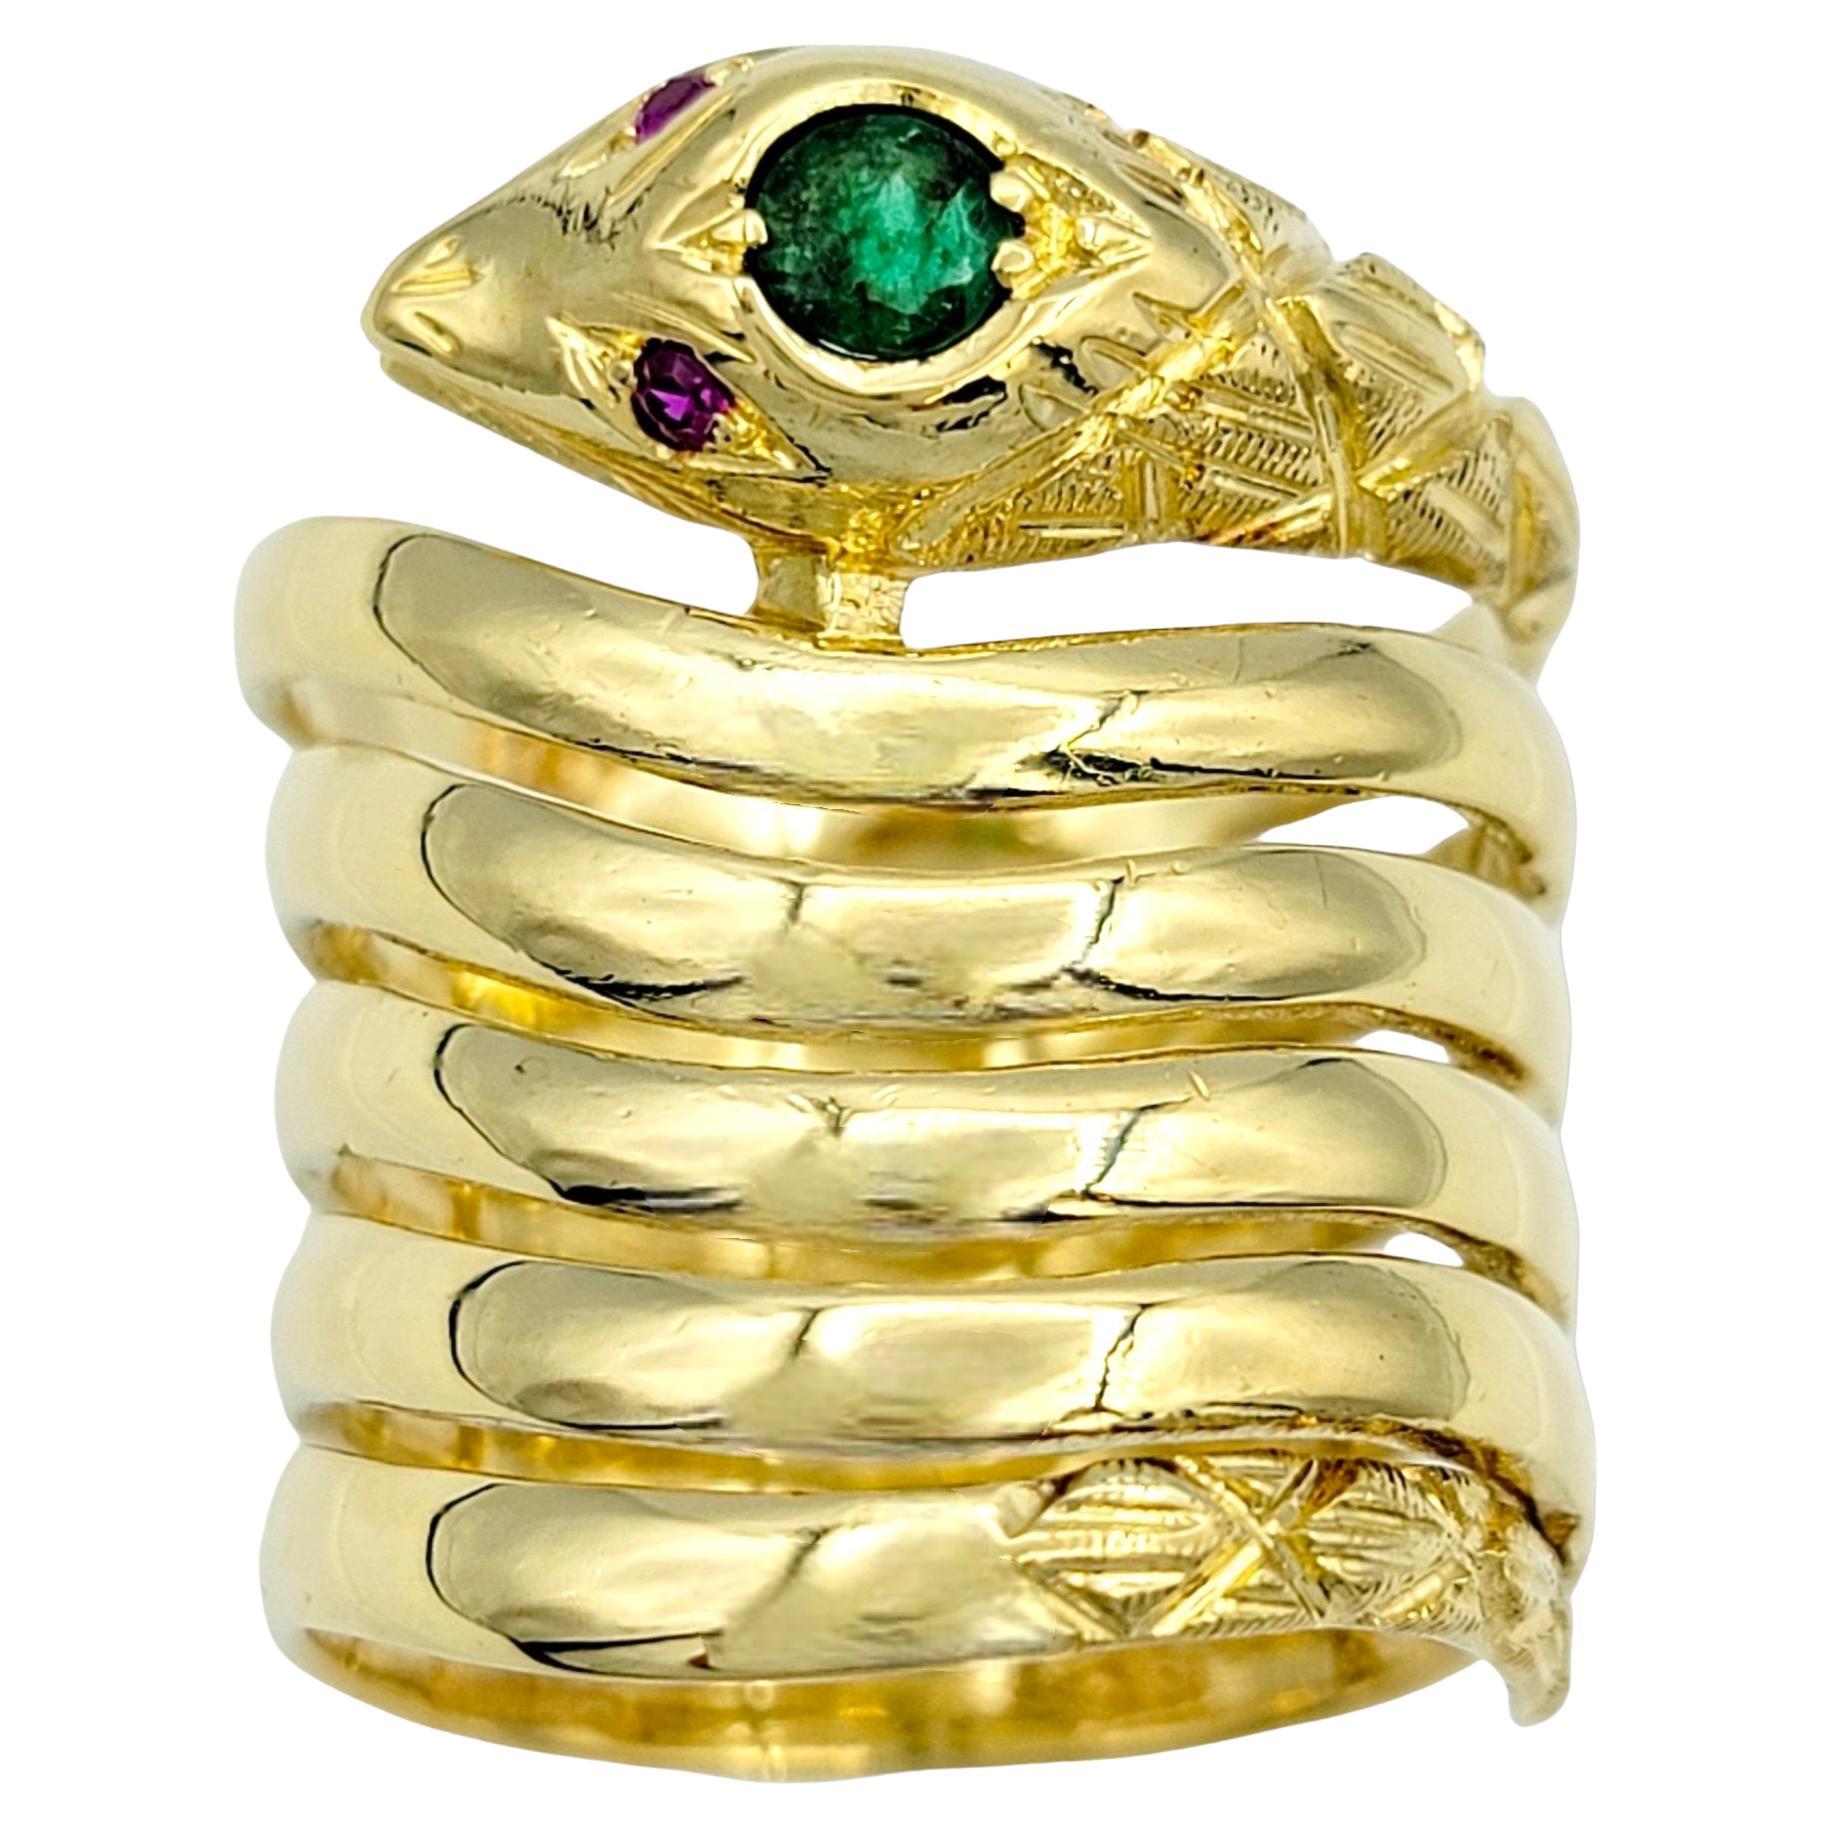 18 Karat Yellow Gold Coiled Snake Bypass Cocktail Ring with Emerald and Rubies